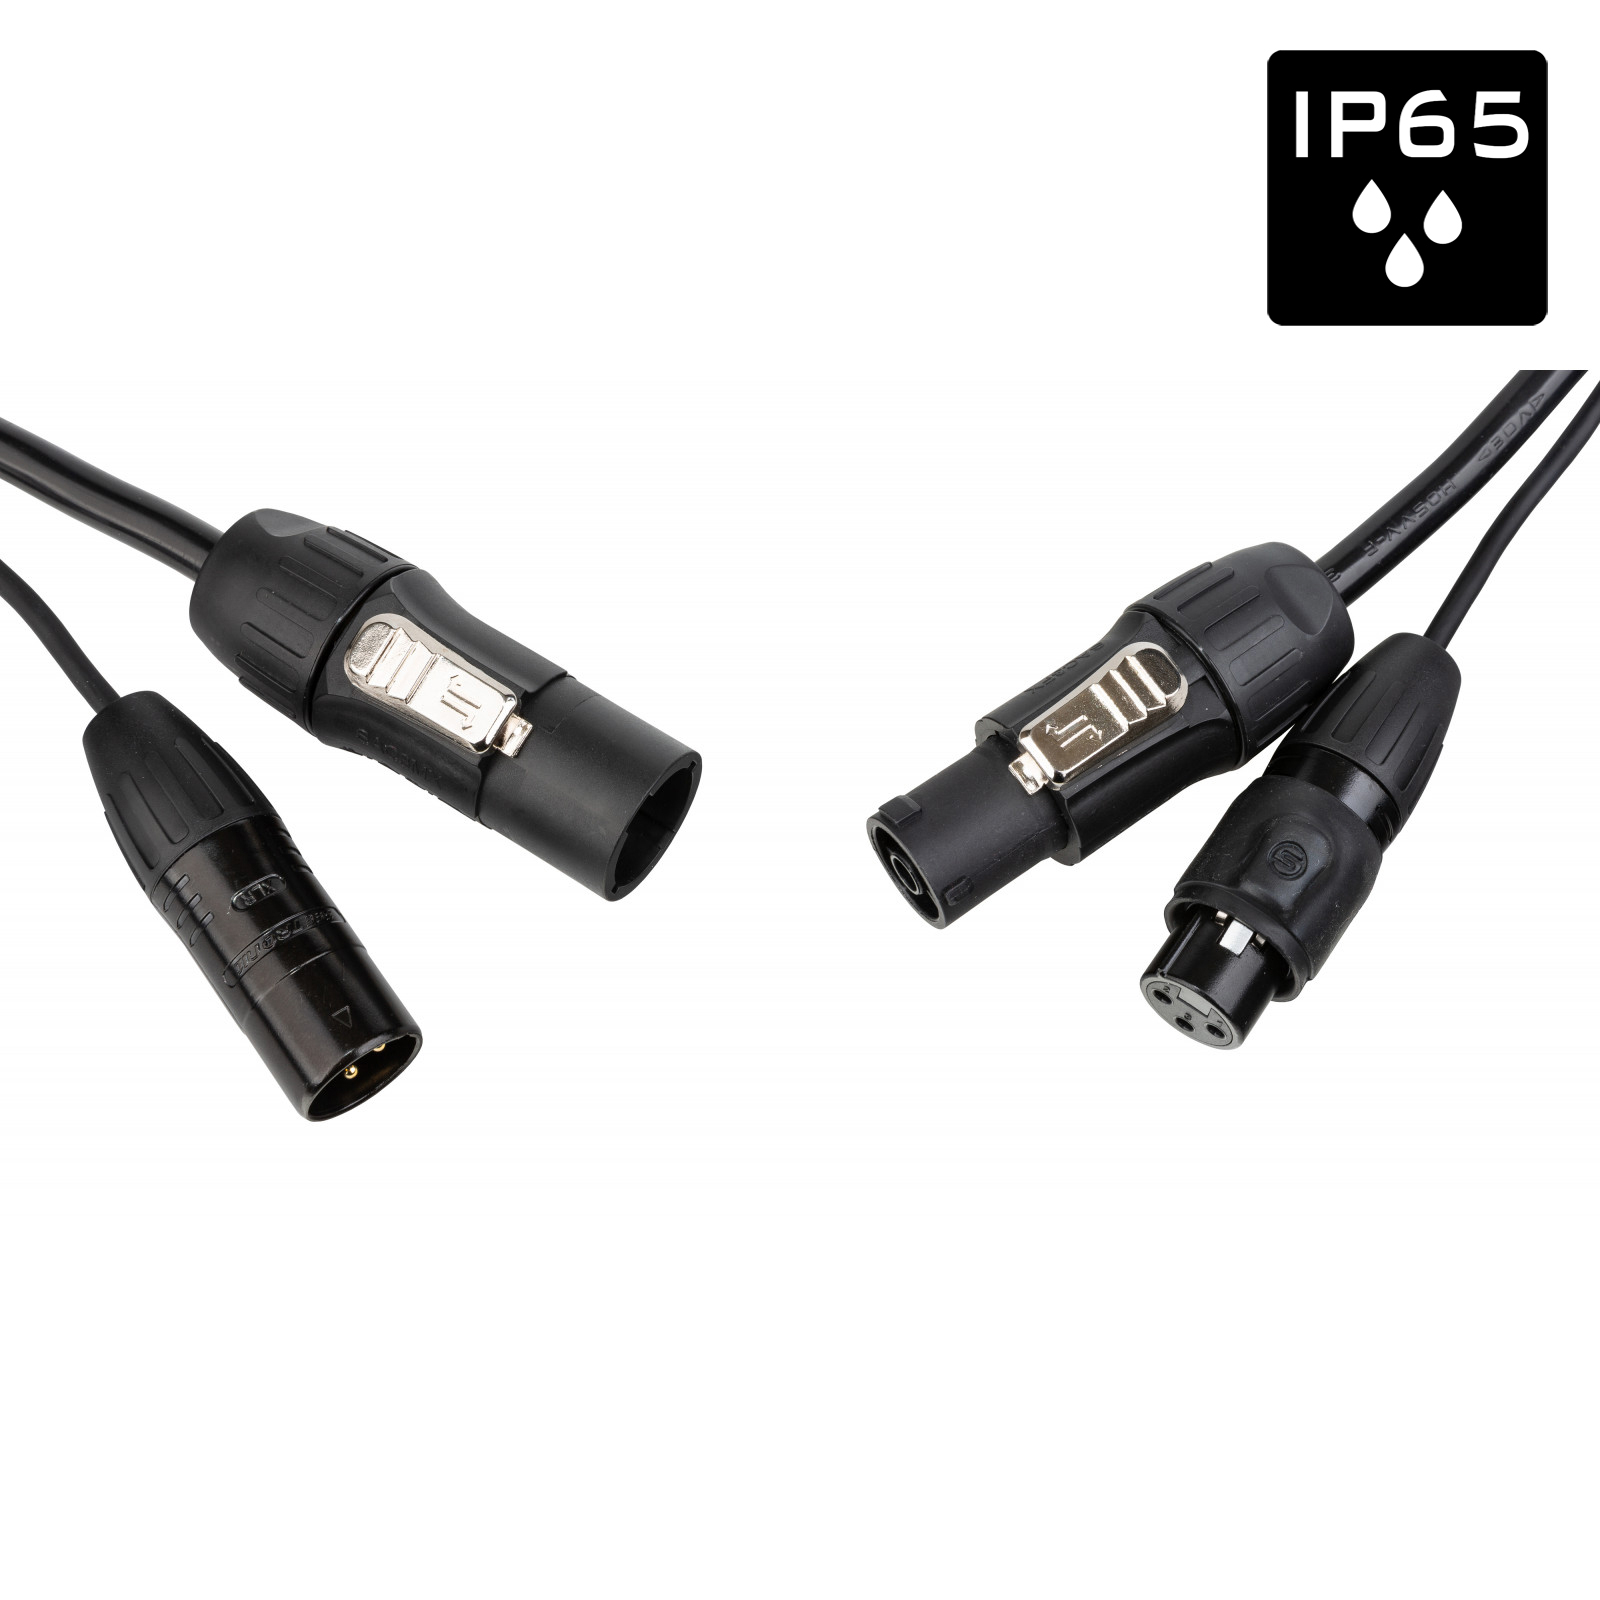 IP65 Outdoor combi cable with Seetronic XLR 3pin and True1 compatible connectors - Length 1.5m